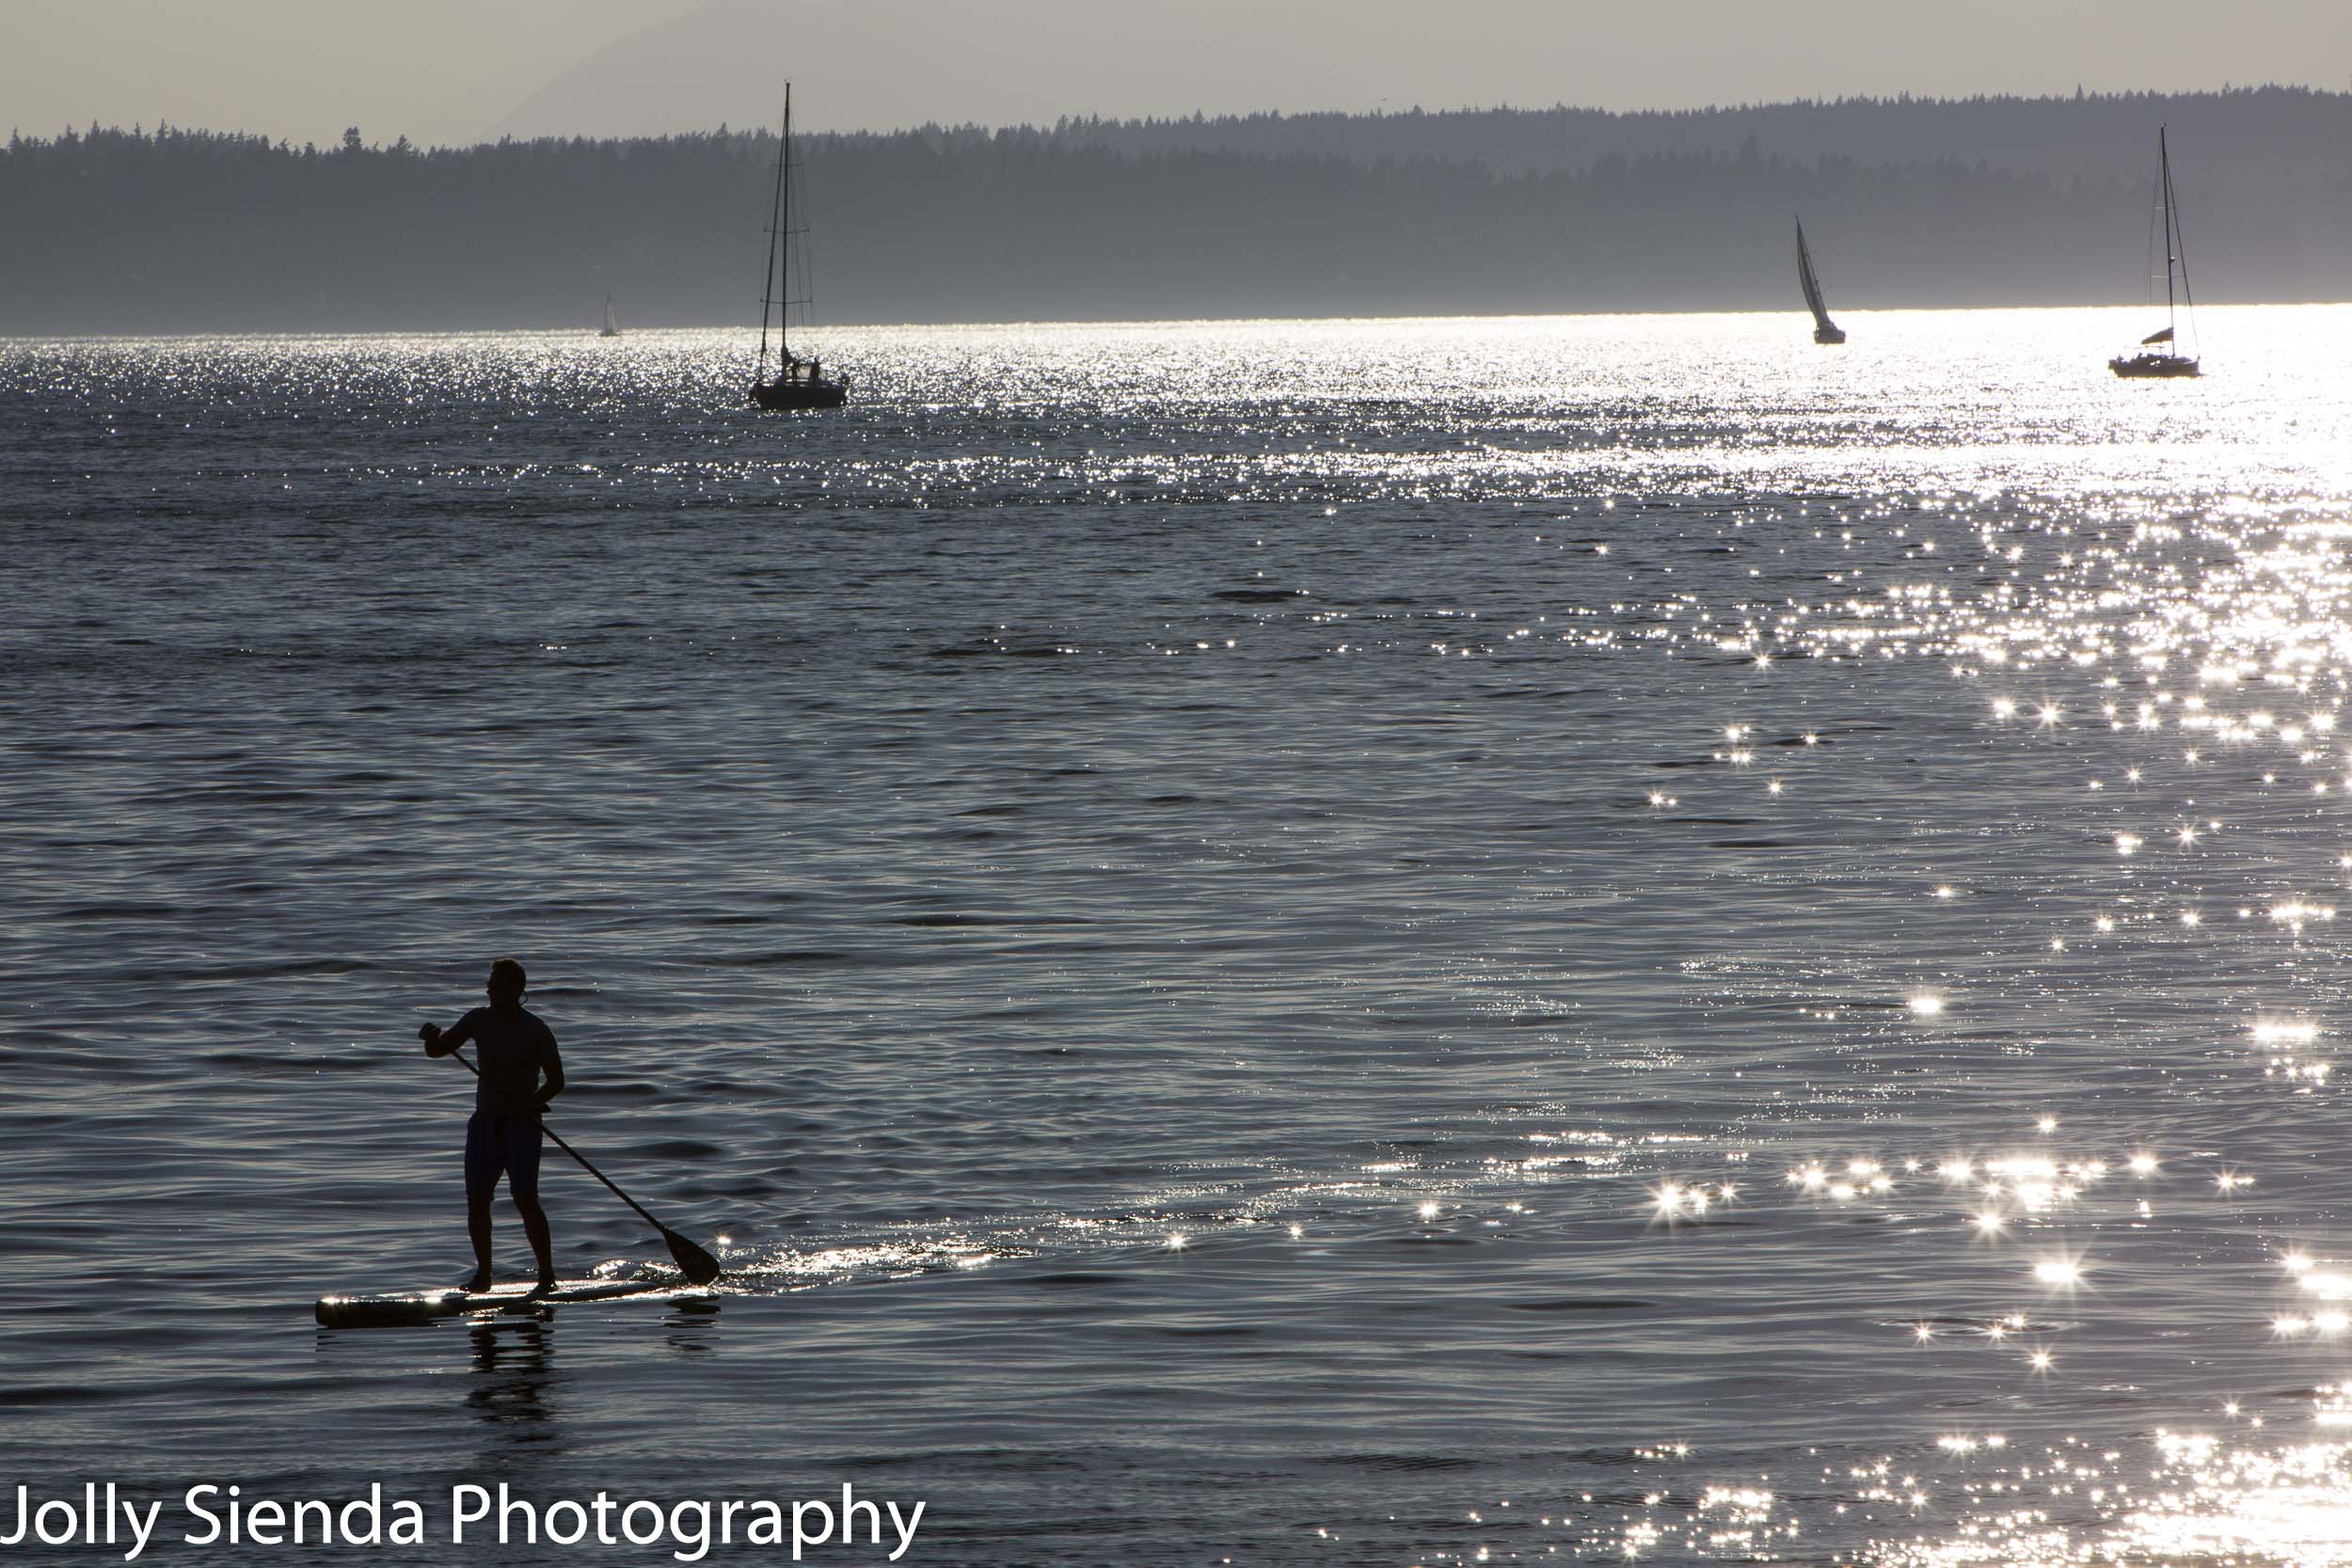 Paddle boarder and sailboats on the bay